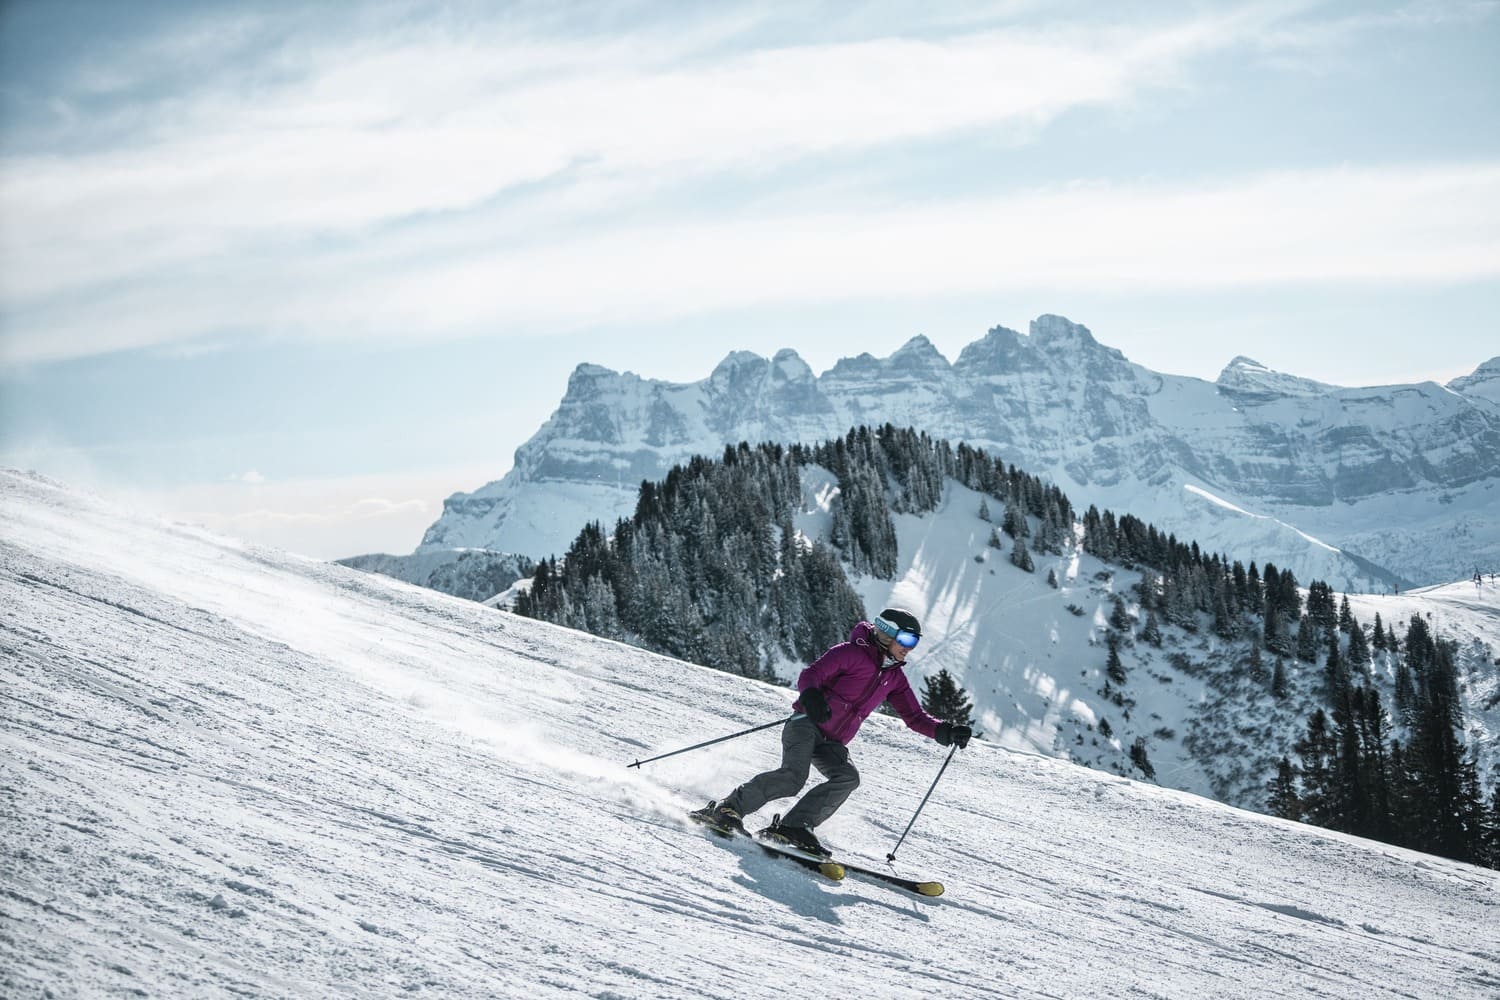 Ski weekend with a low of snow on Chatel slopes